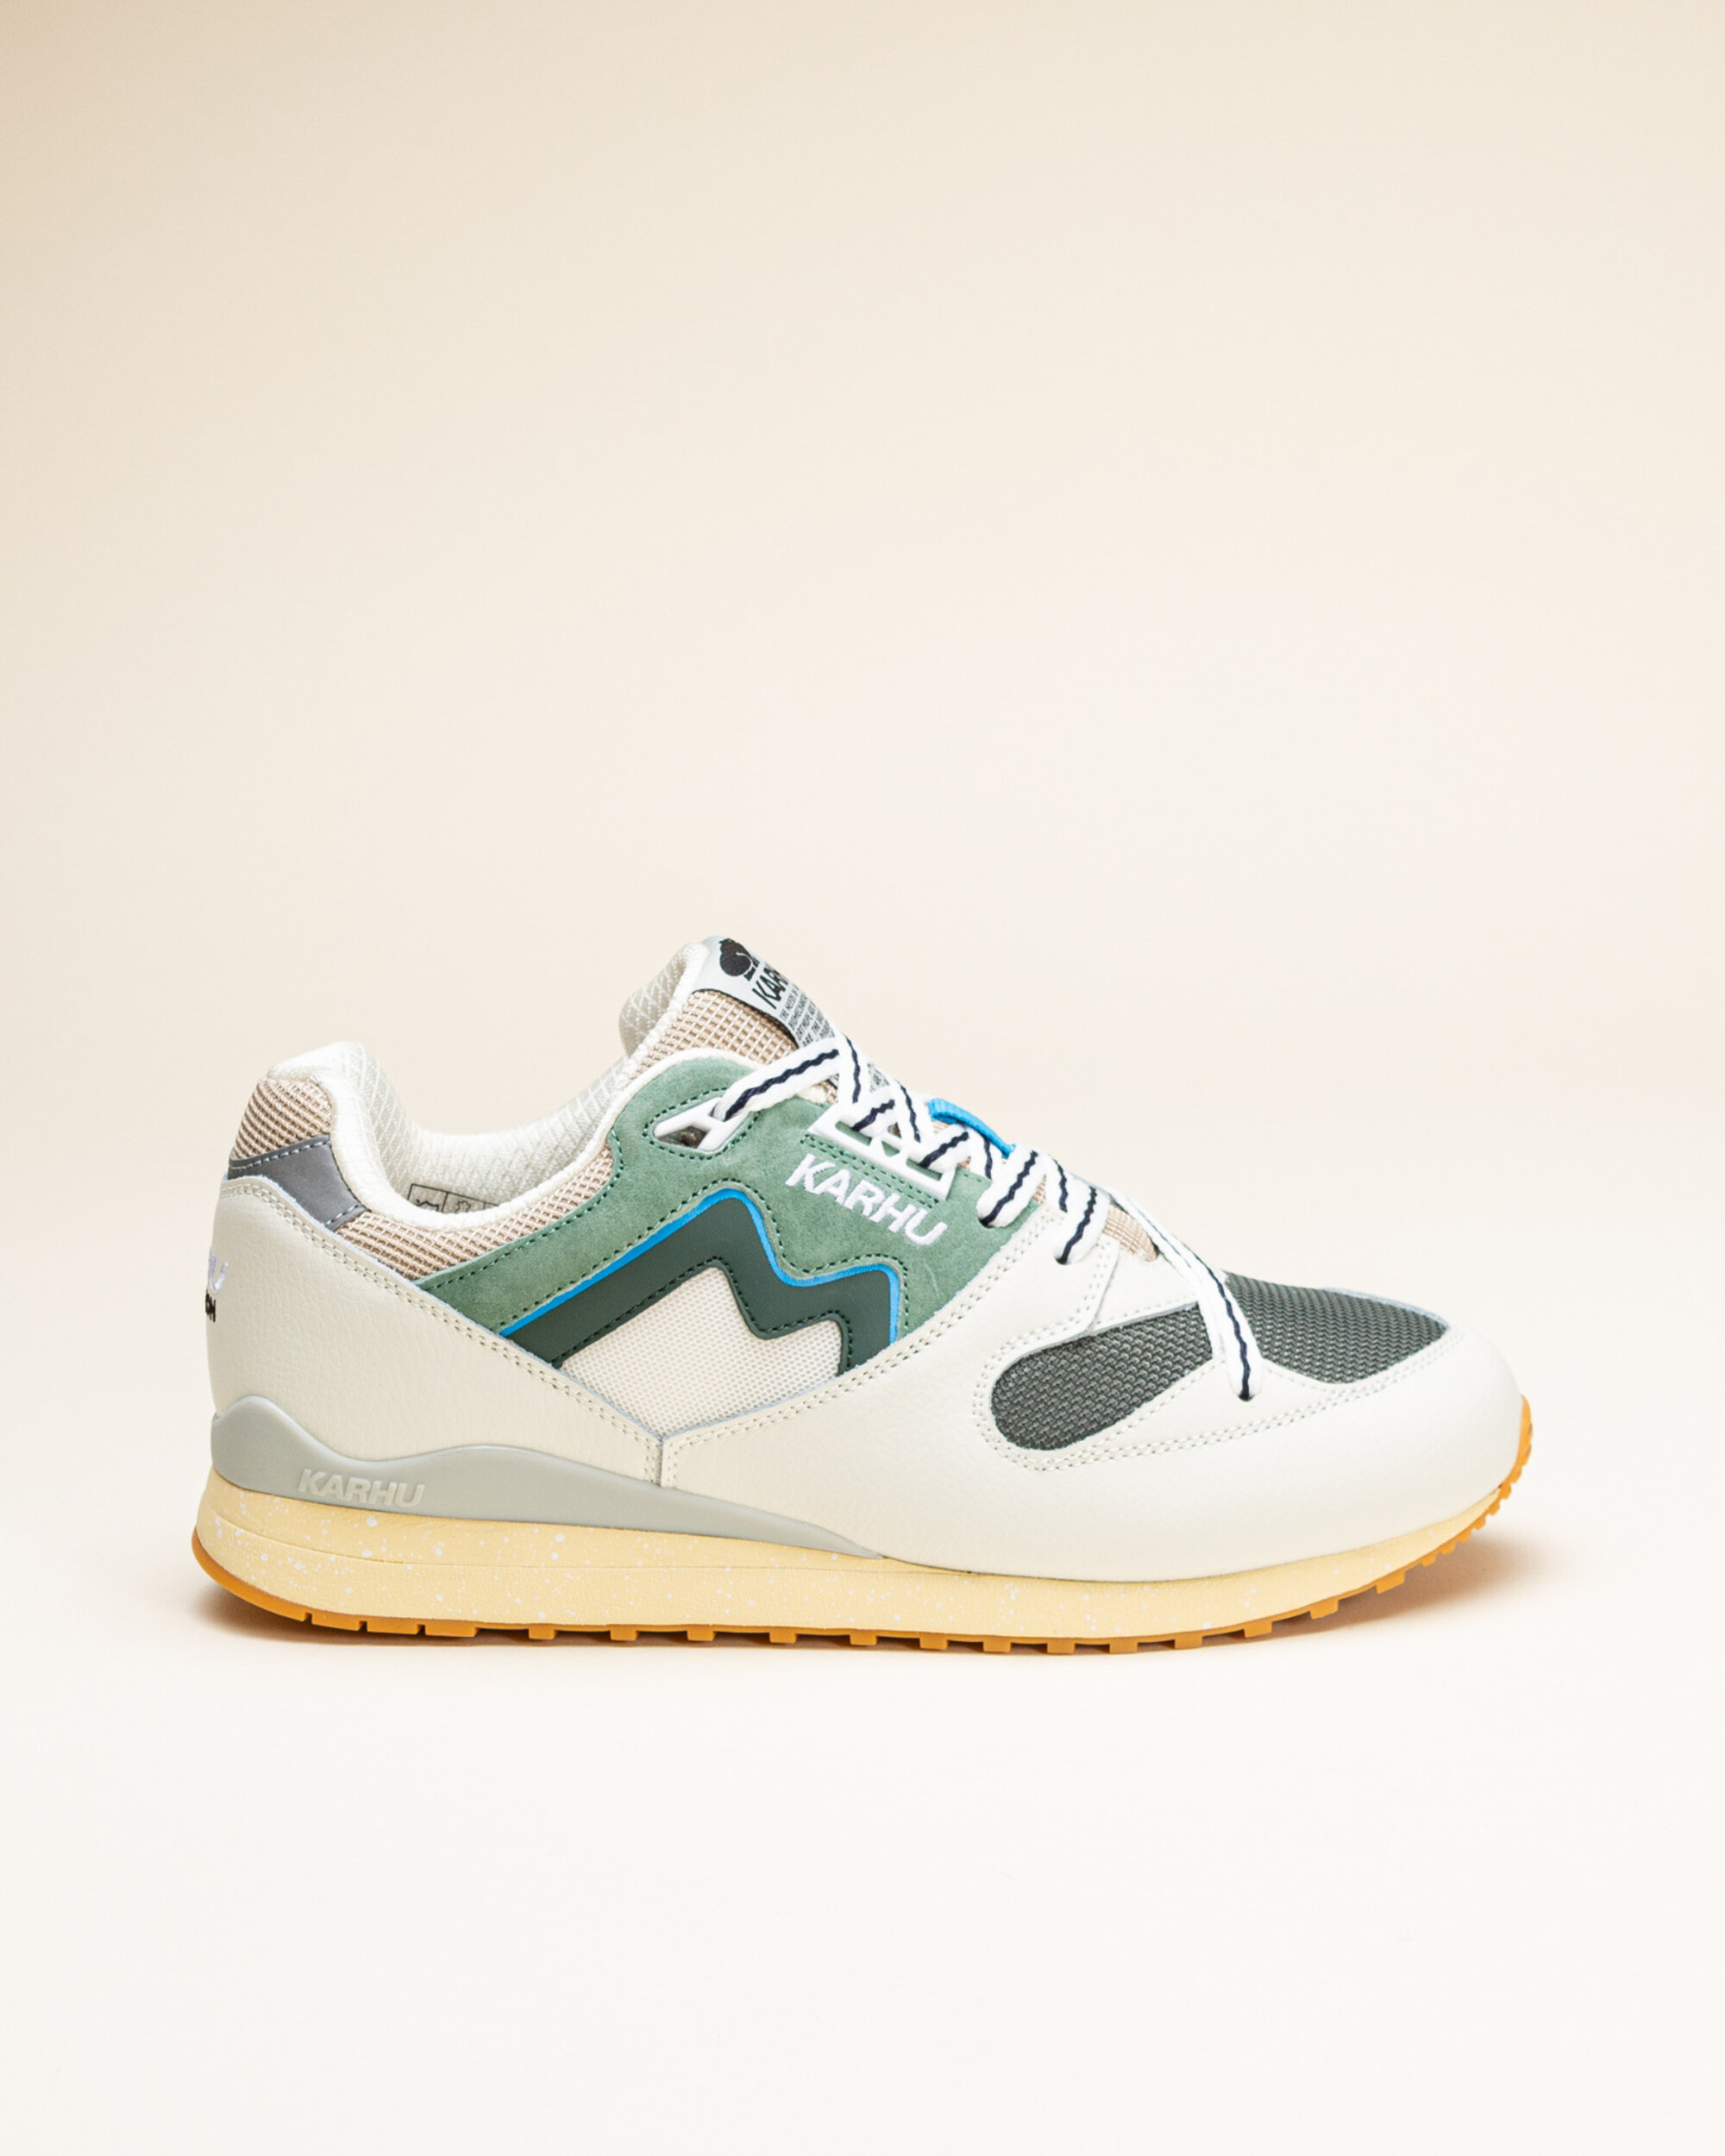 Karhu Synchron Classic - Lily White/Forest Green